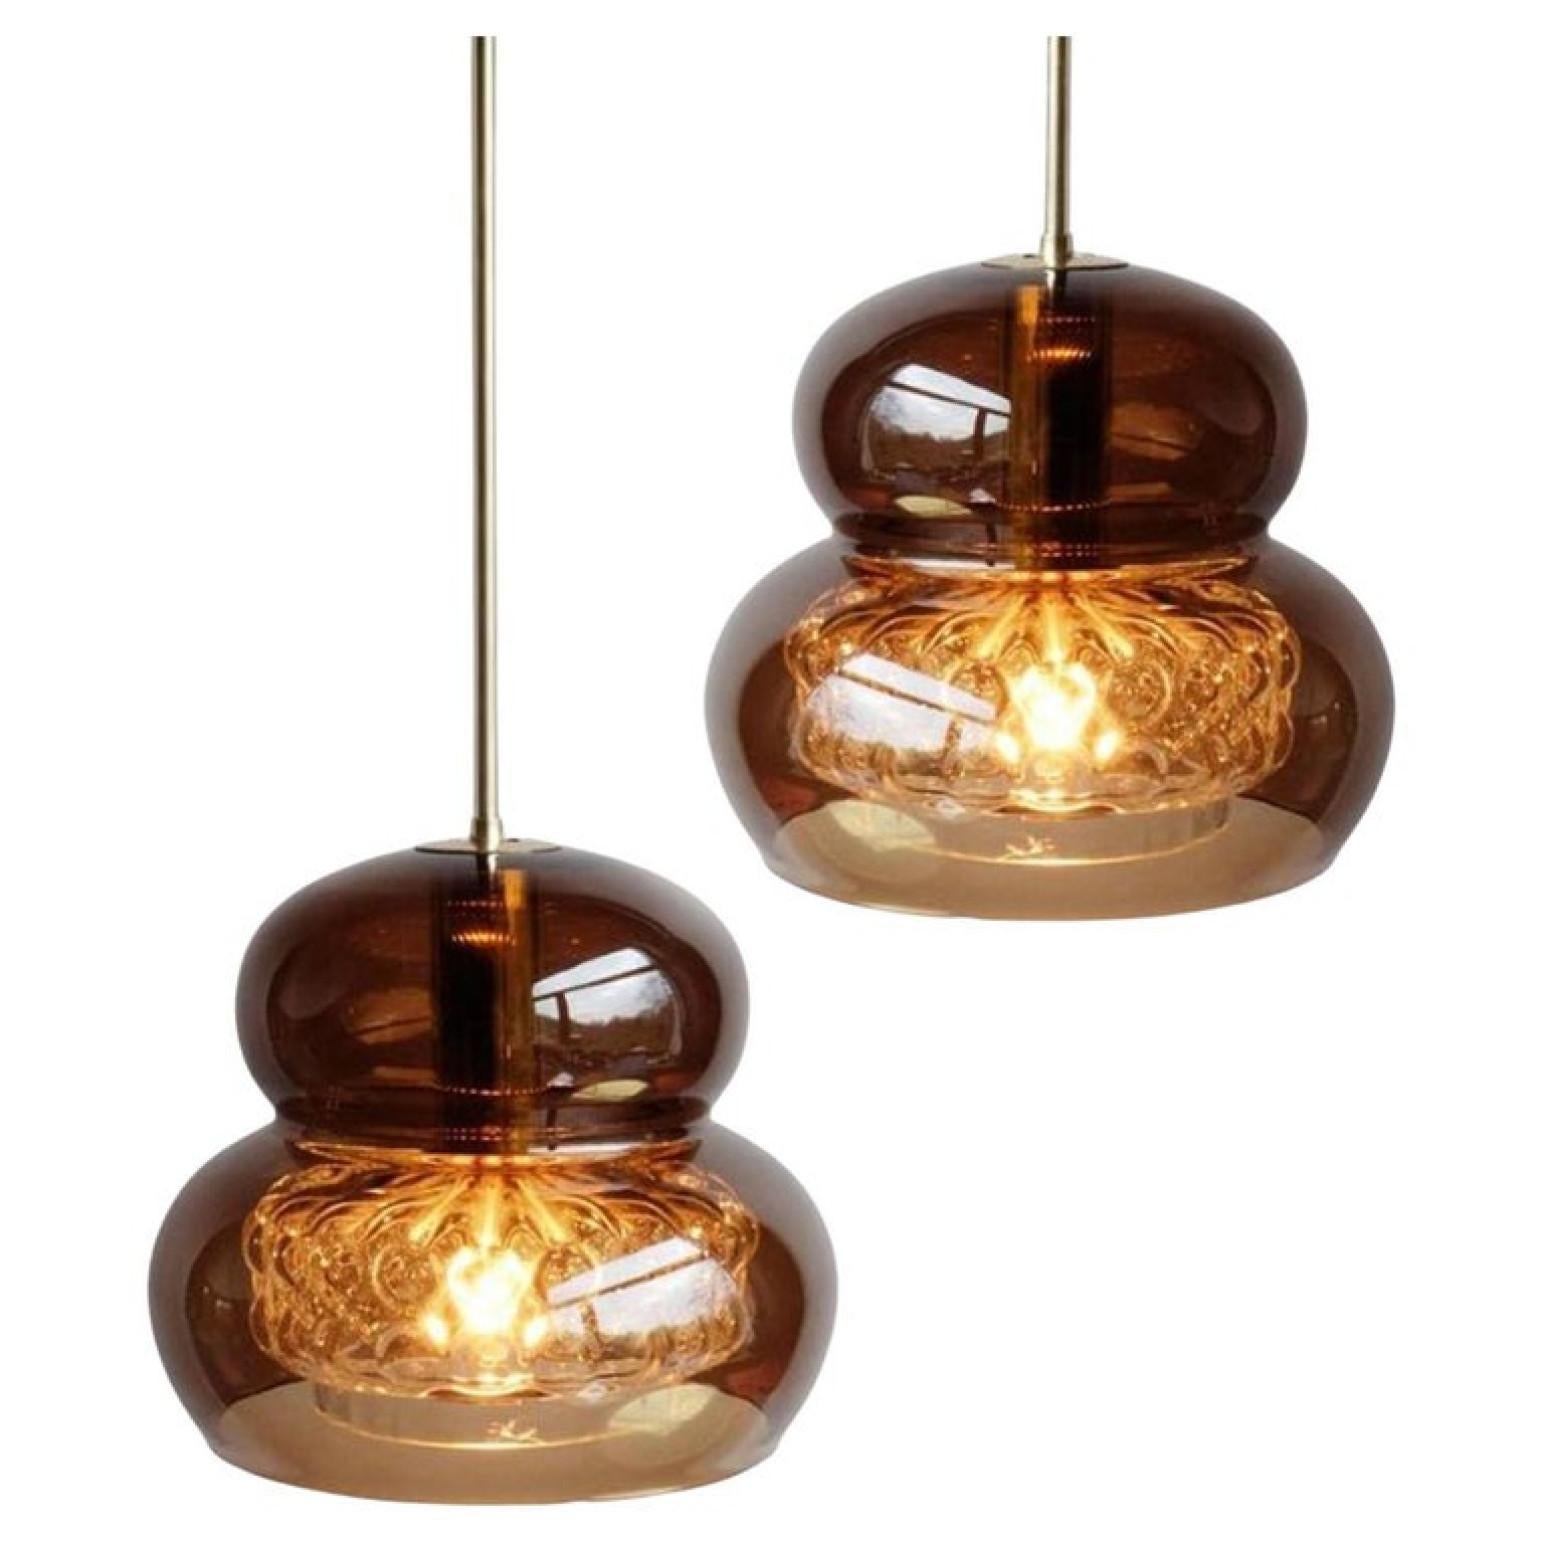 A rare pair of elegant pendant lights in smoke/brown colored glass with brass details from world famous Orrefors Glas and designed by renowned glassware designer Carl Fagerlund.

Dimensions height overall 35.4